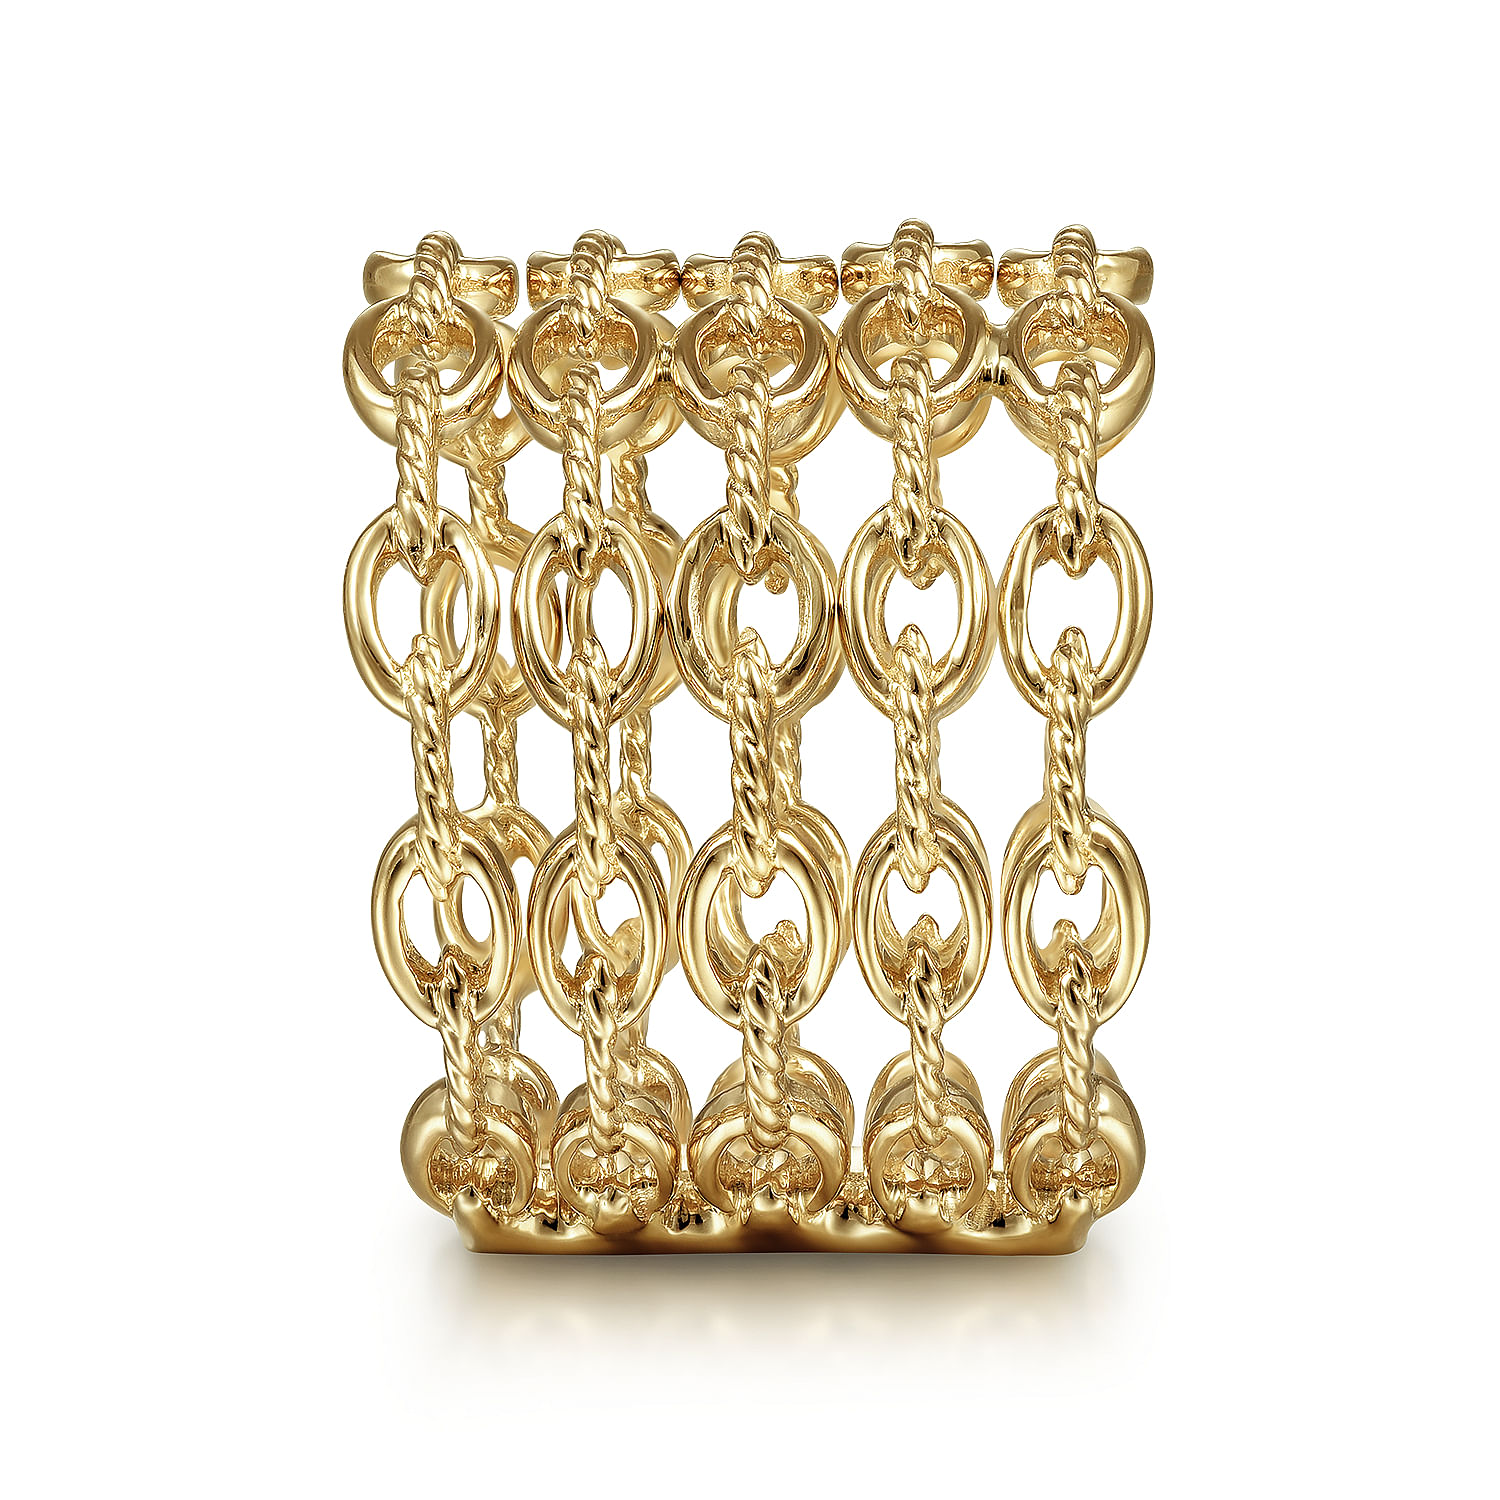 14K Yellow Gold Wide Twisted Multi-Link Wide Band Ring